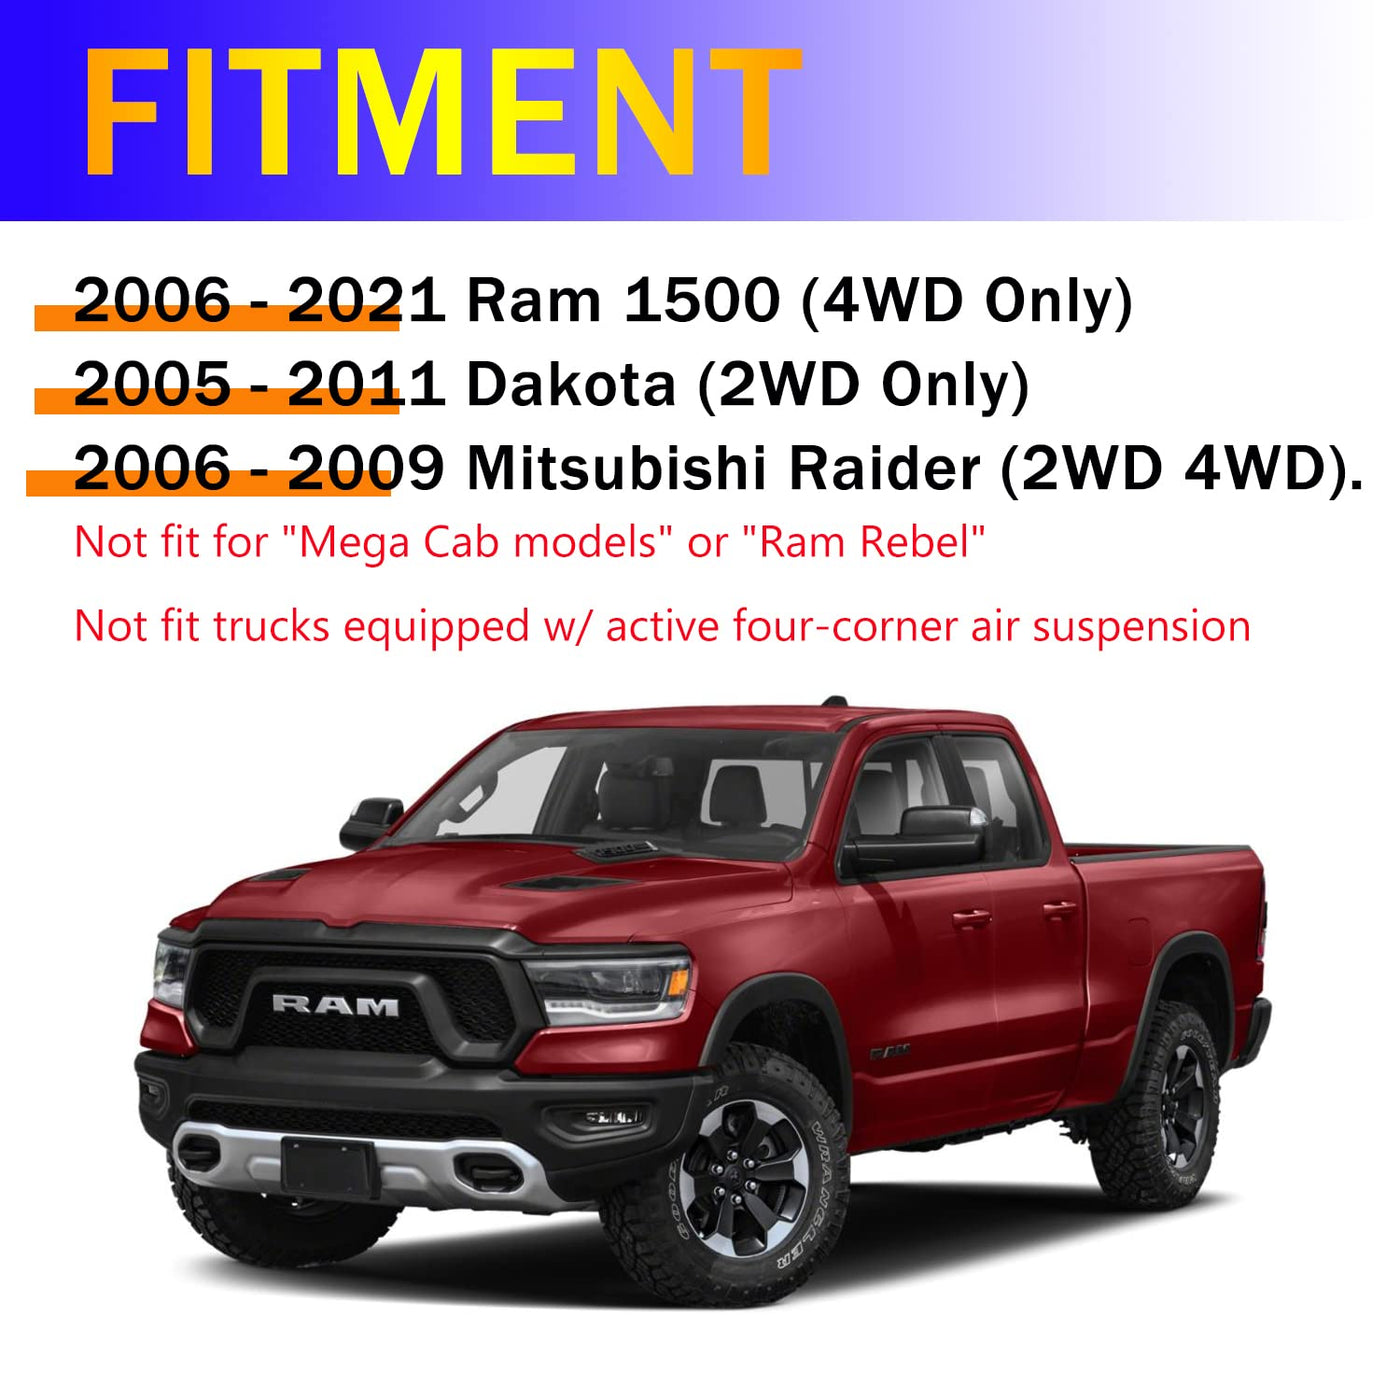 GARVEE 2.5 inch Ram 1500 Front Leveling Kits Front Strut Spacers Lift Kit for 2006-2021 Ram 1500 4WD